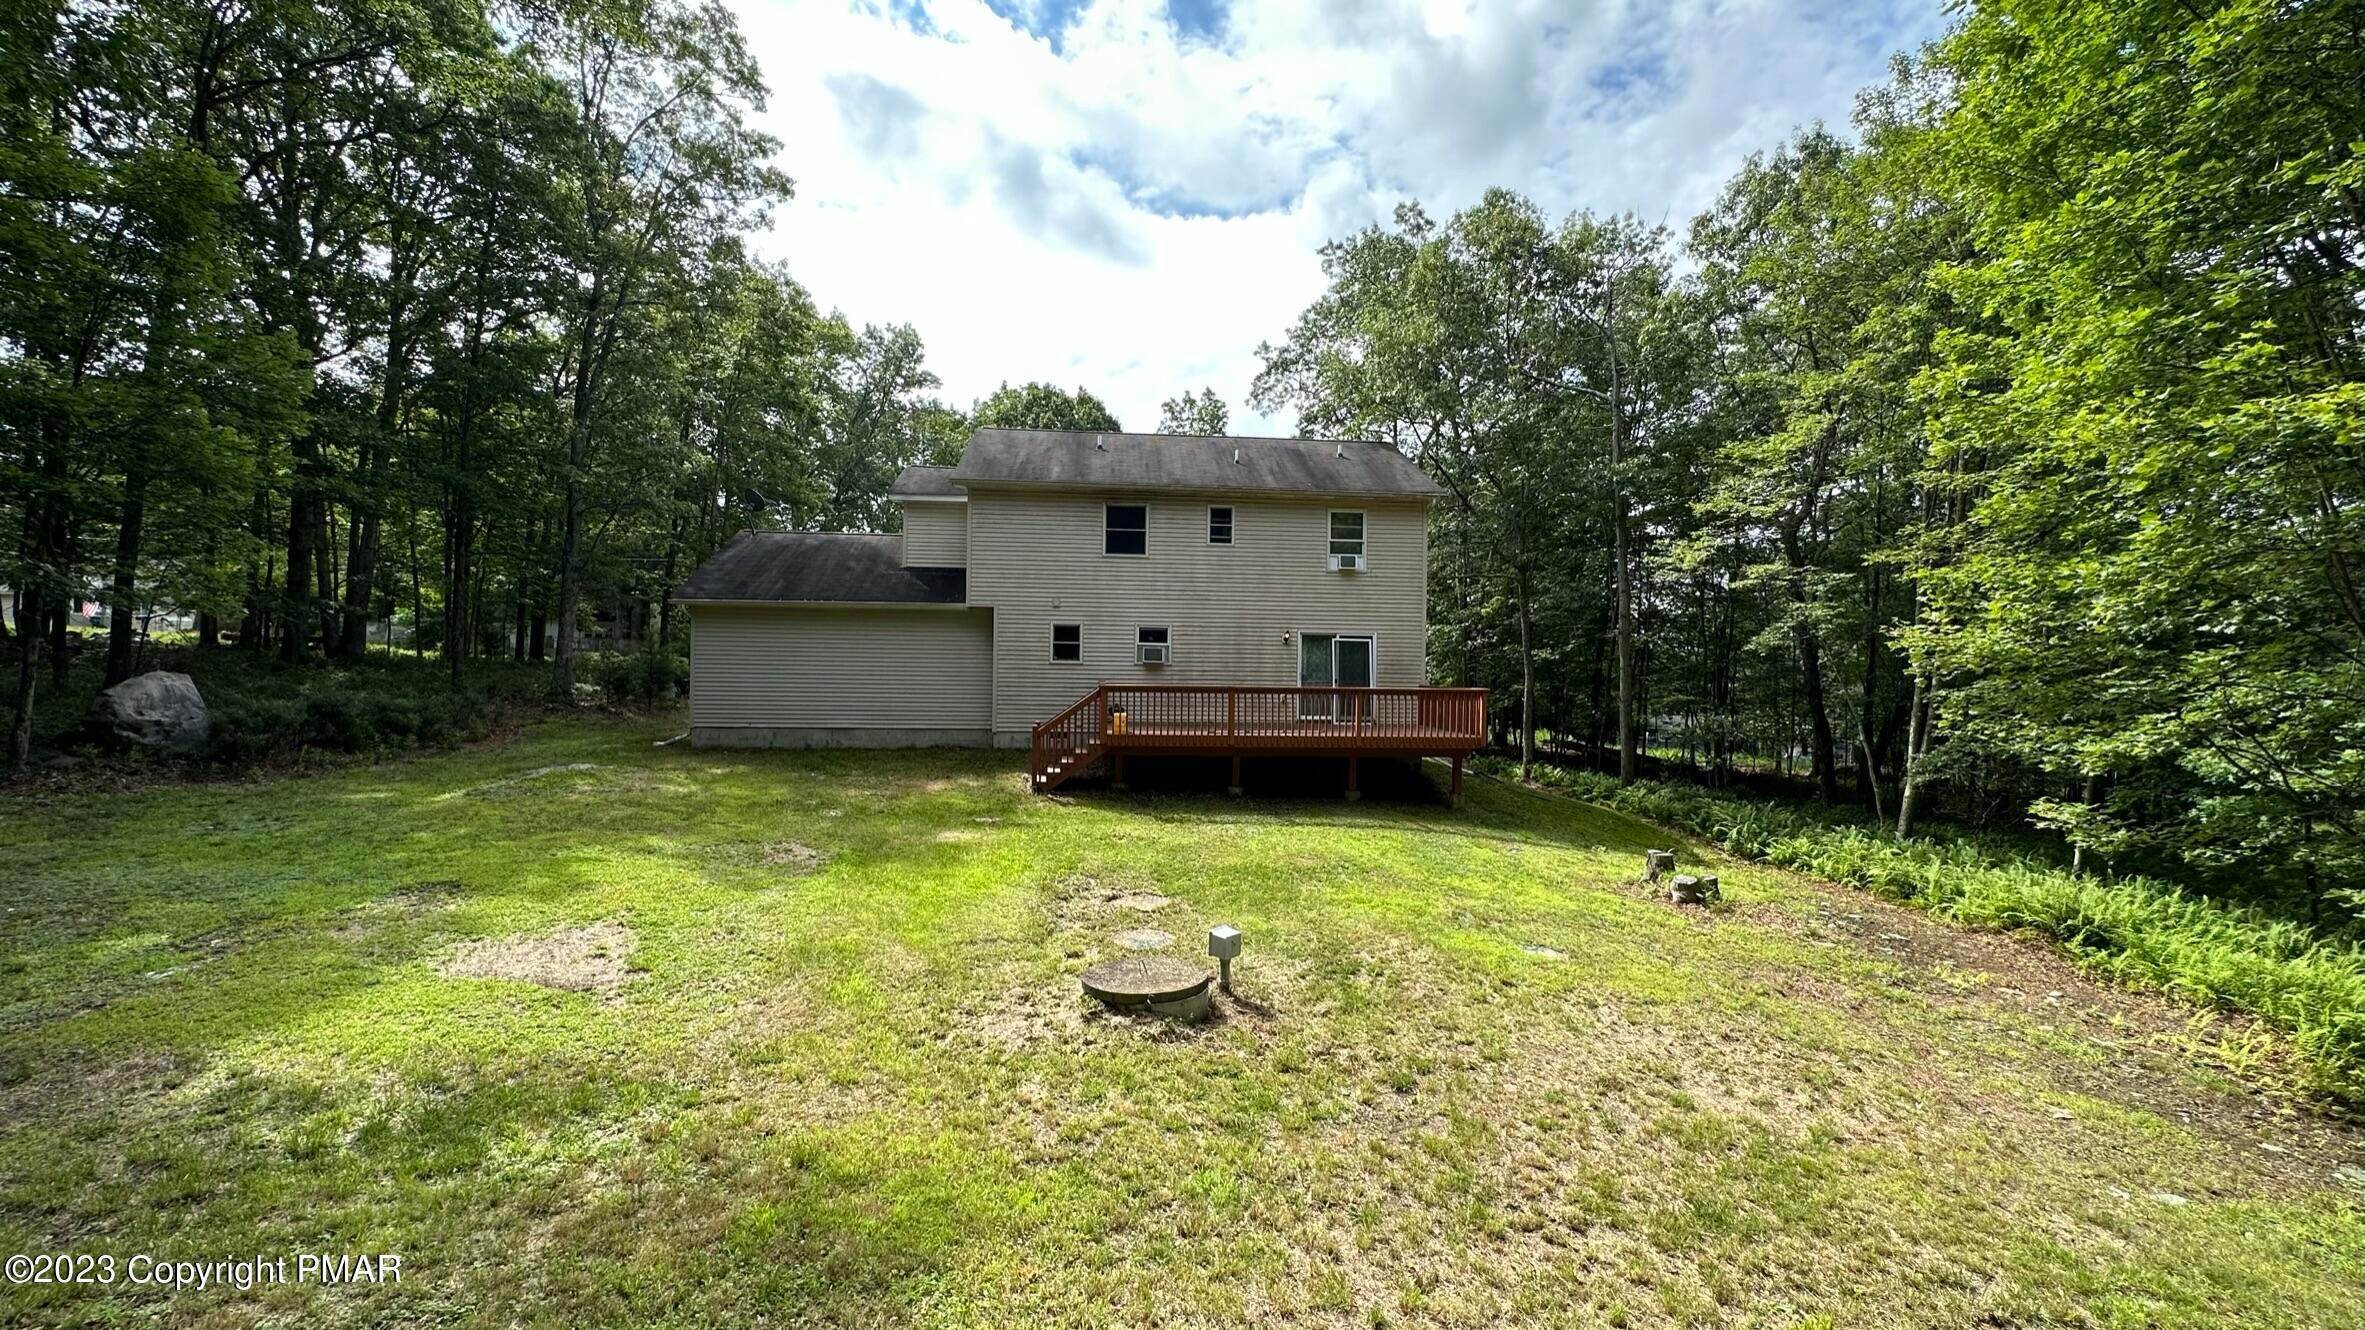 27. Single Family Homes for Sale at 59 Mountain Top Road East Stroudsburg, Pennsylvania 18302 United States